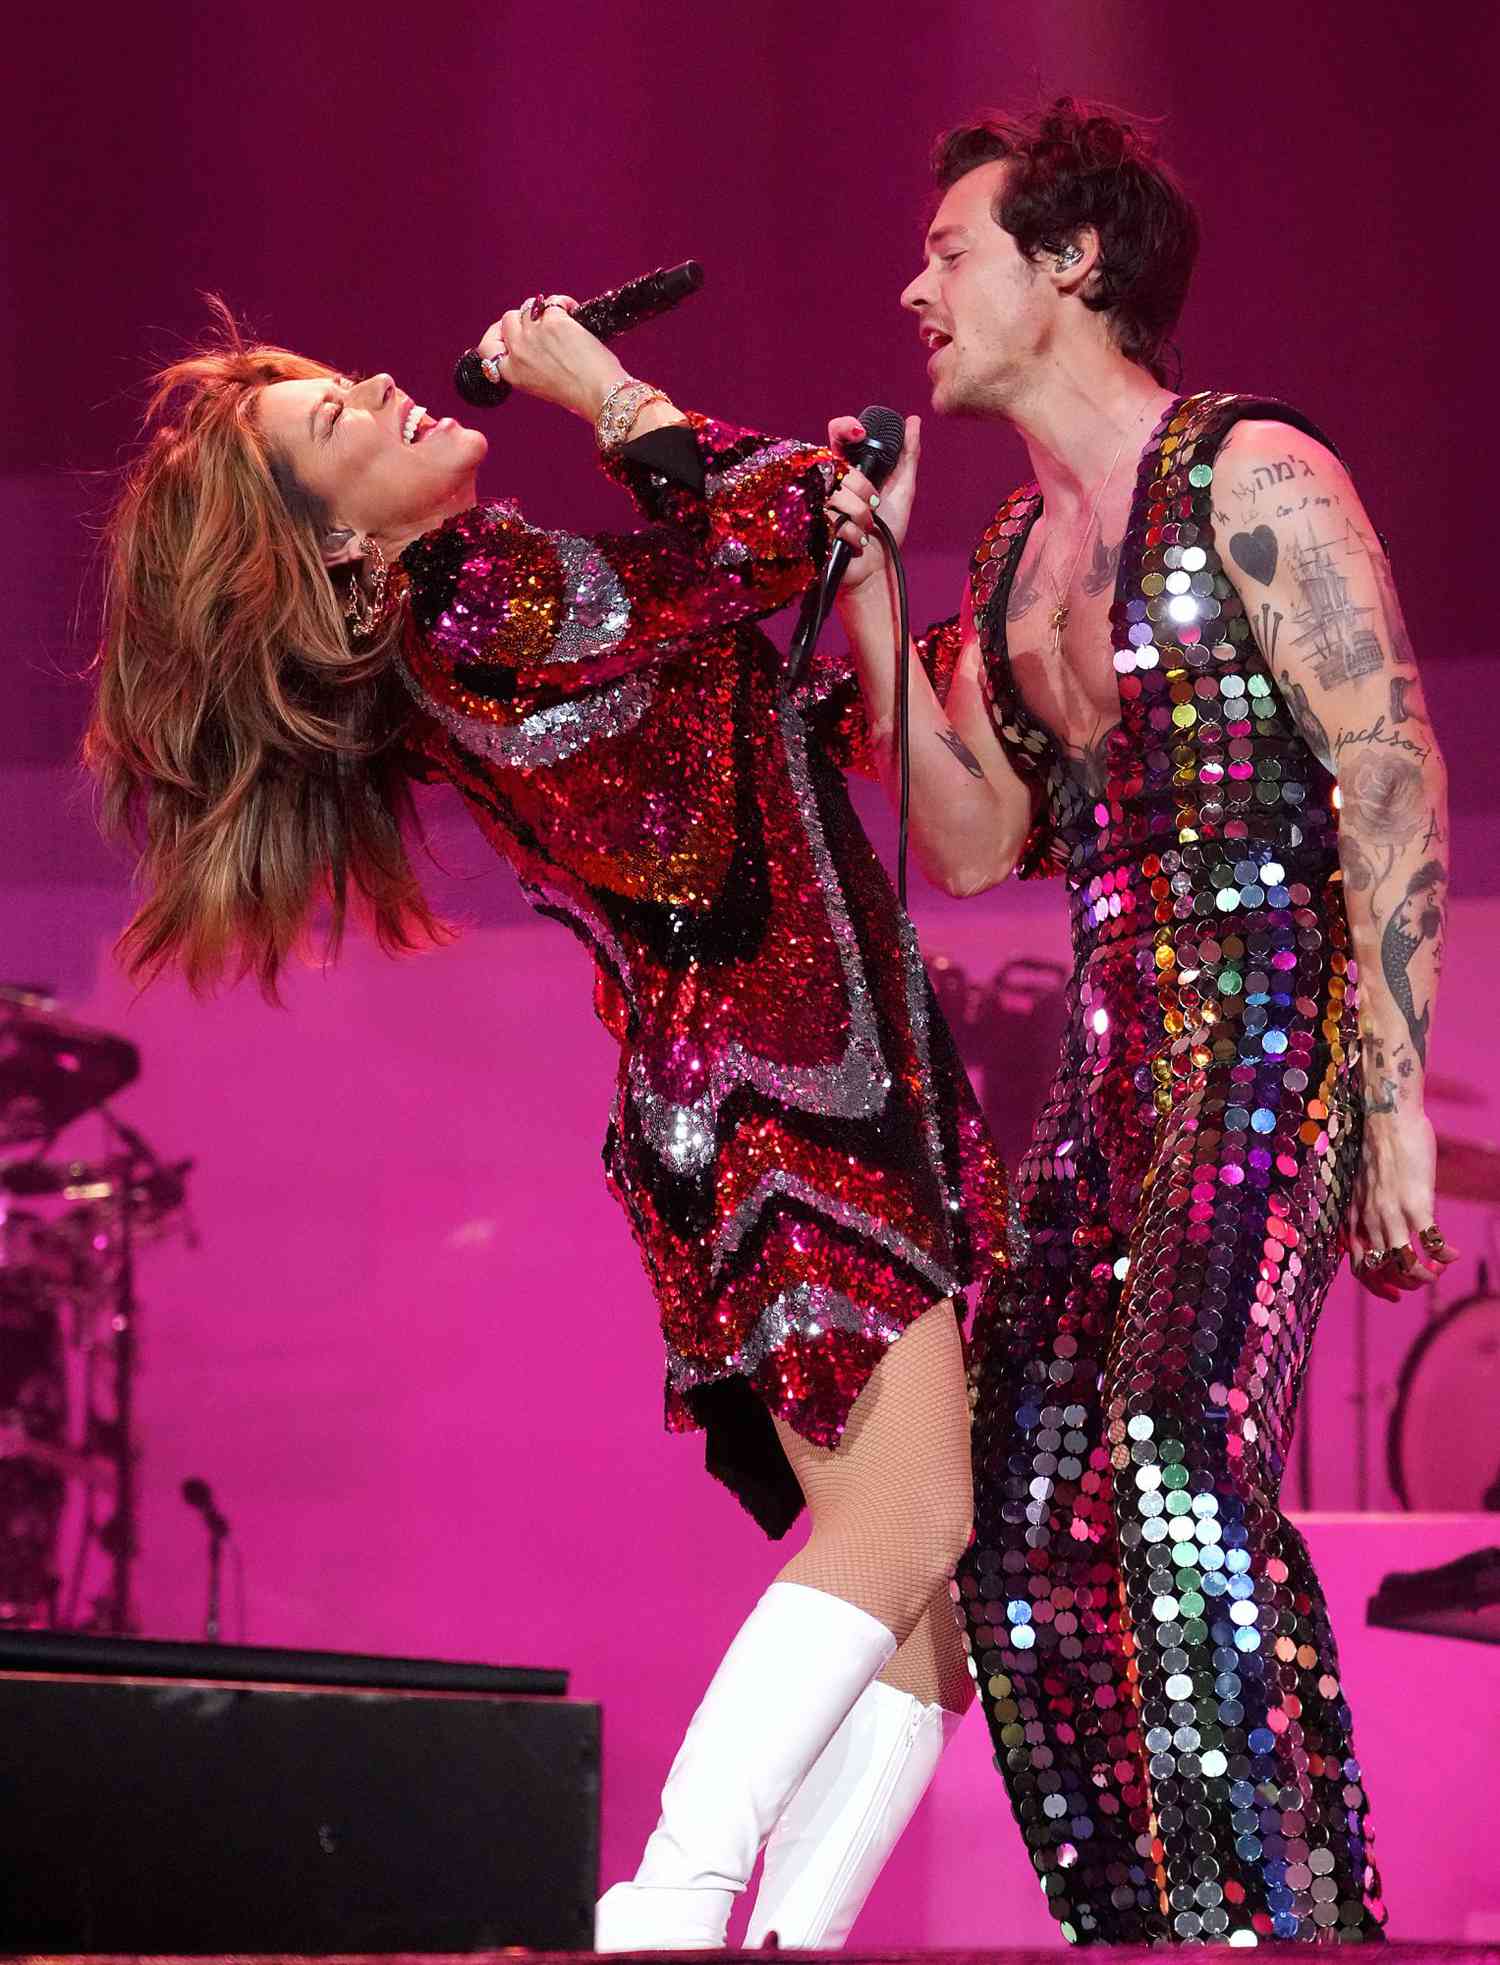 INDIO, CALIFORNIA - APRIL 15: (L-R) Shania Twain and Harry Styles perform onstage at the Coachella Stage during the 2022 Coachella Valley Music And Arts Festival on April 15, 2022 in Indio, California. (Photo by Kevin Mazur/Getty Images for ABA)